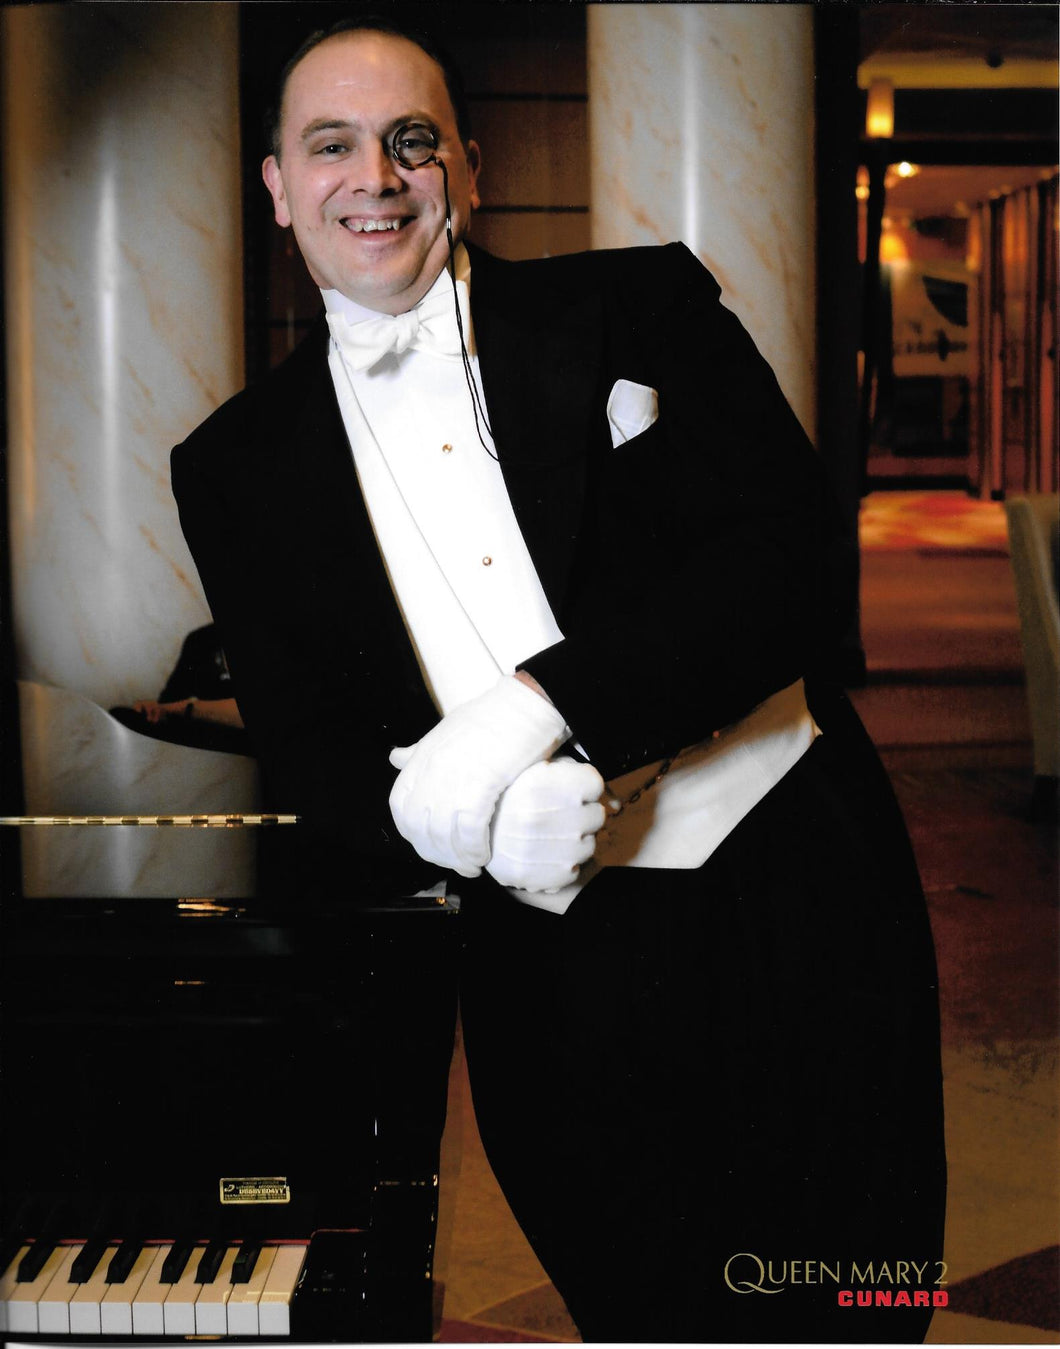 Bob models an original vintage formal tailcoat, one of the extant Victorian coats used to make RH921